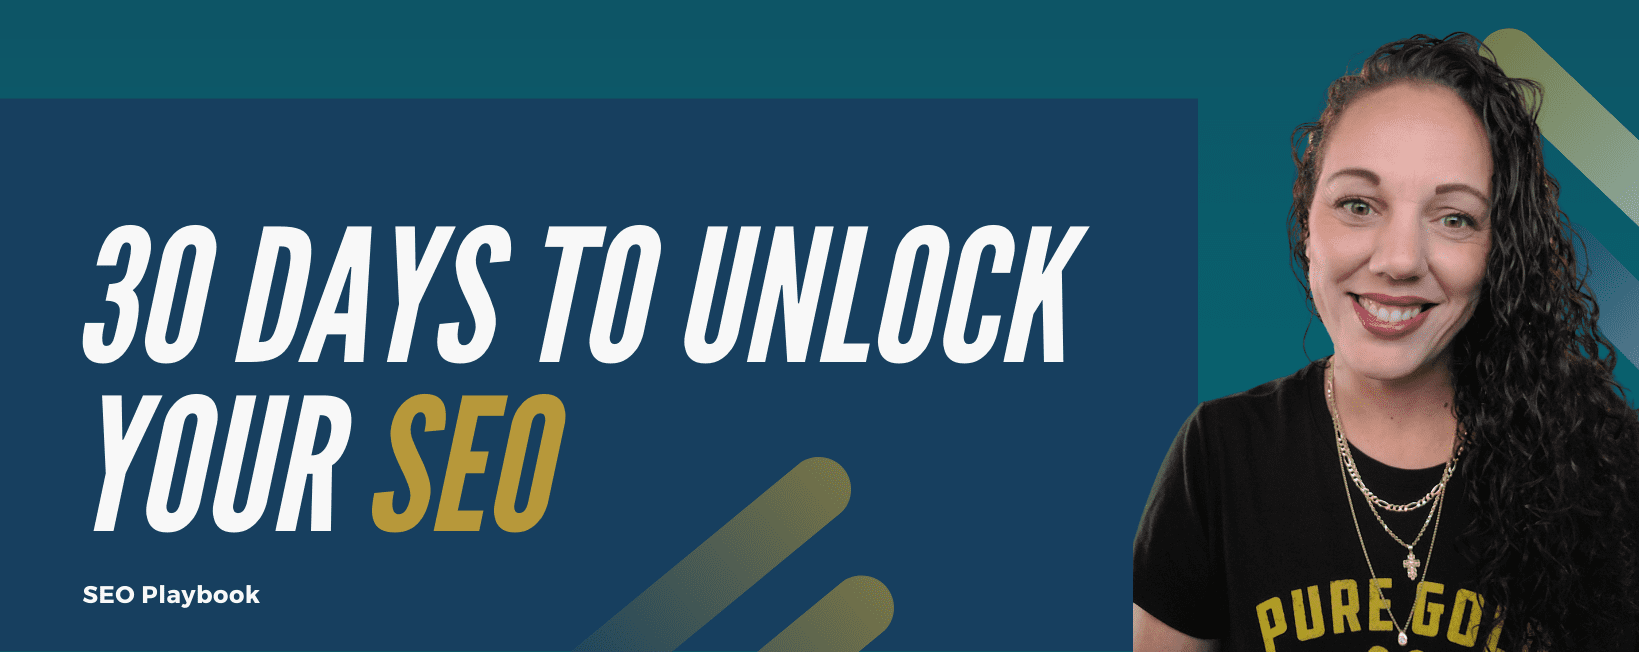 30 Days to Unlock Your SEO 1